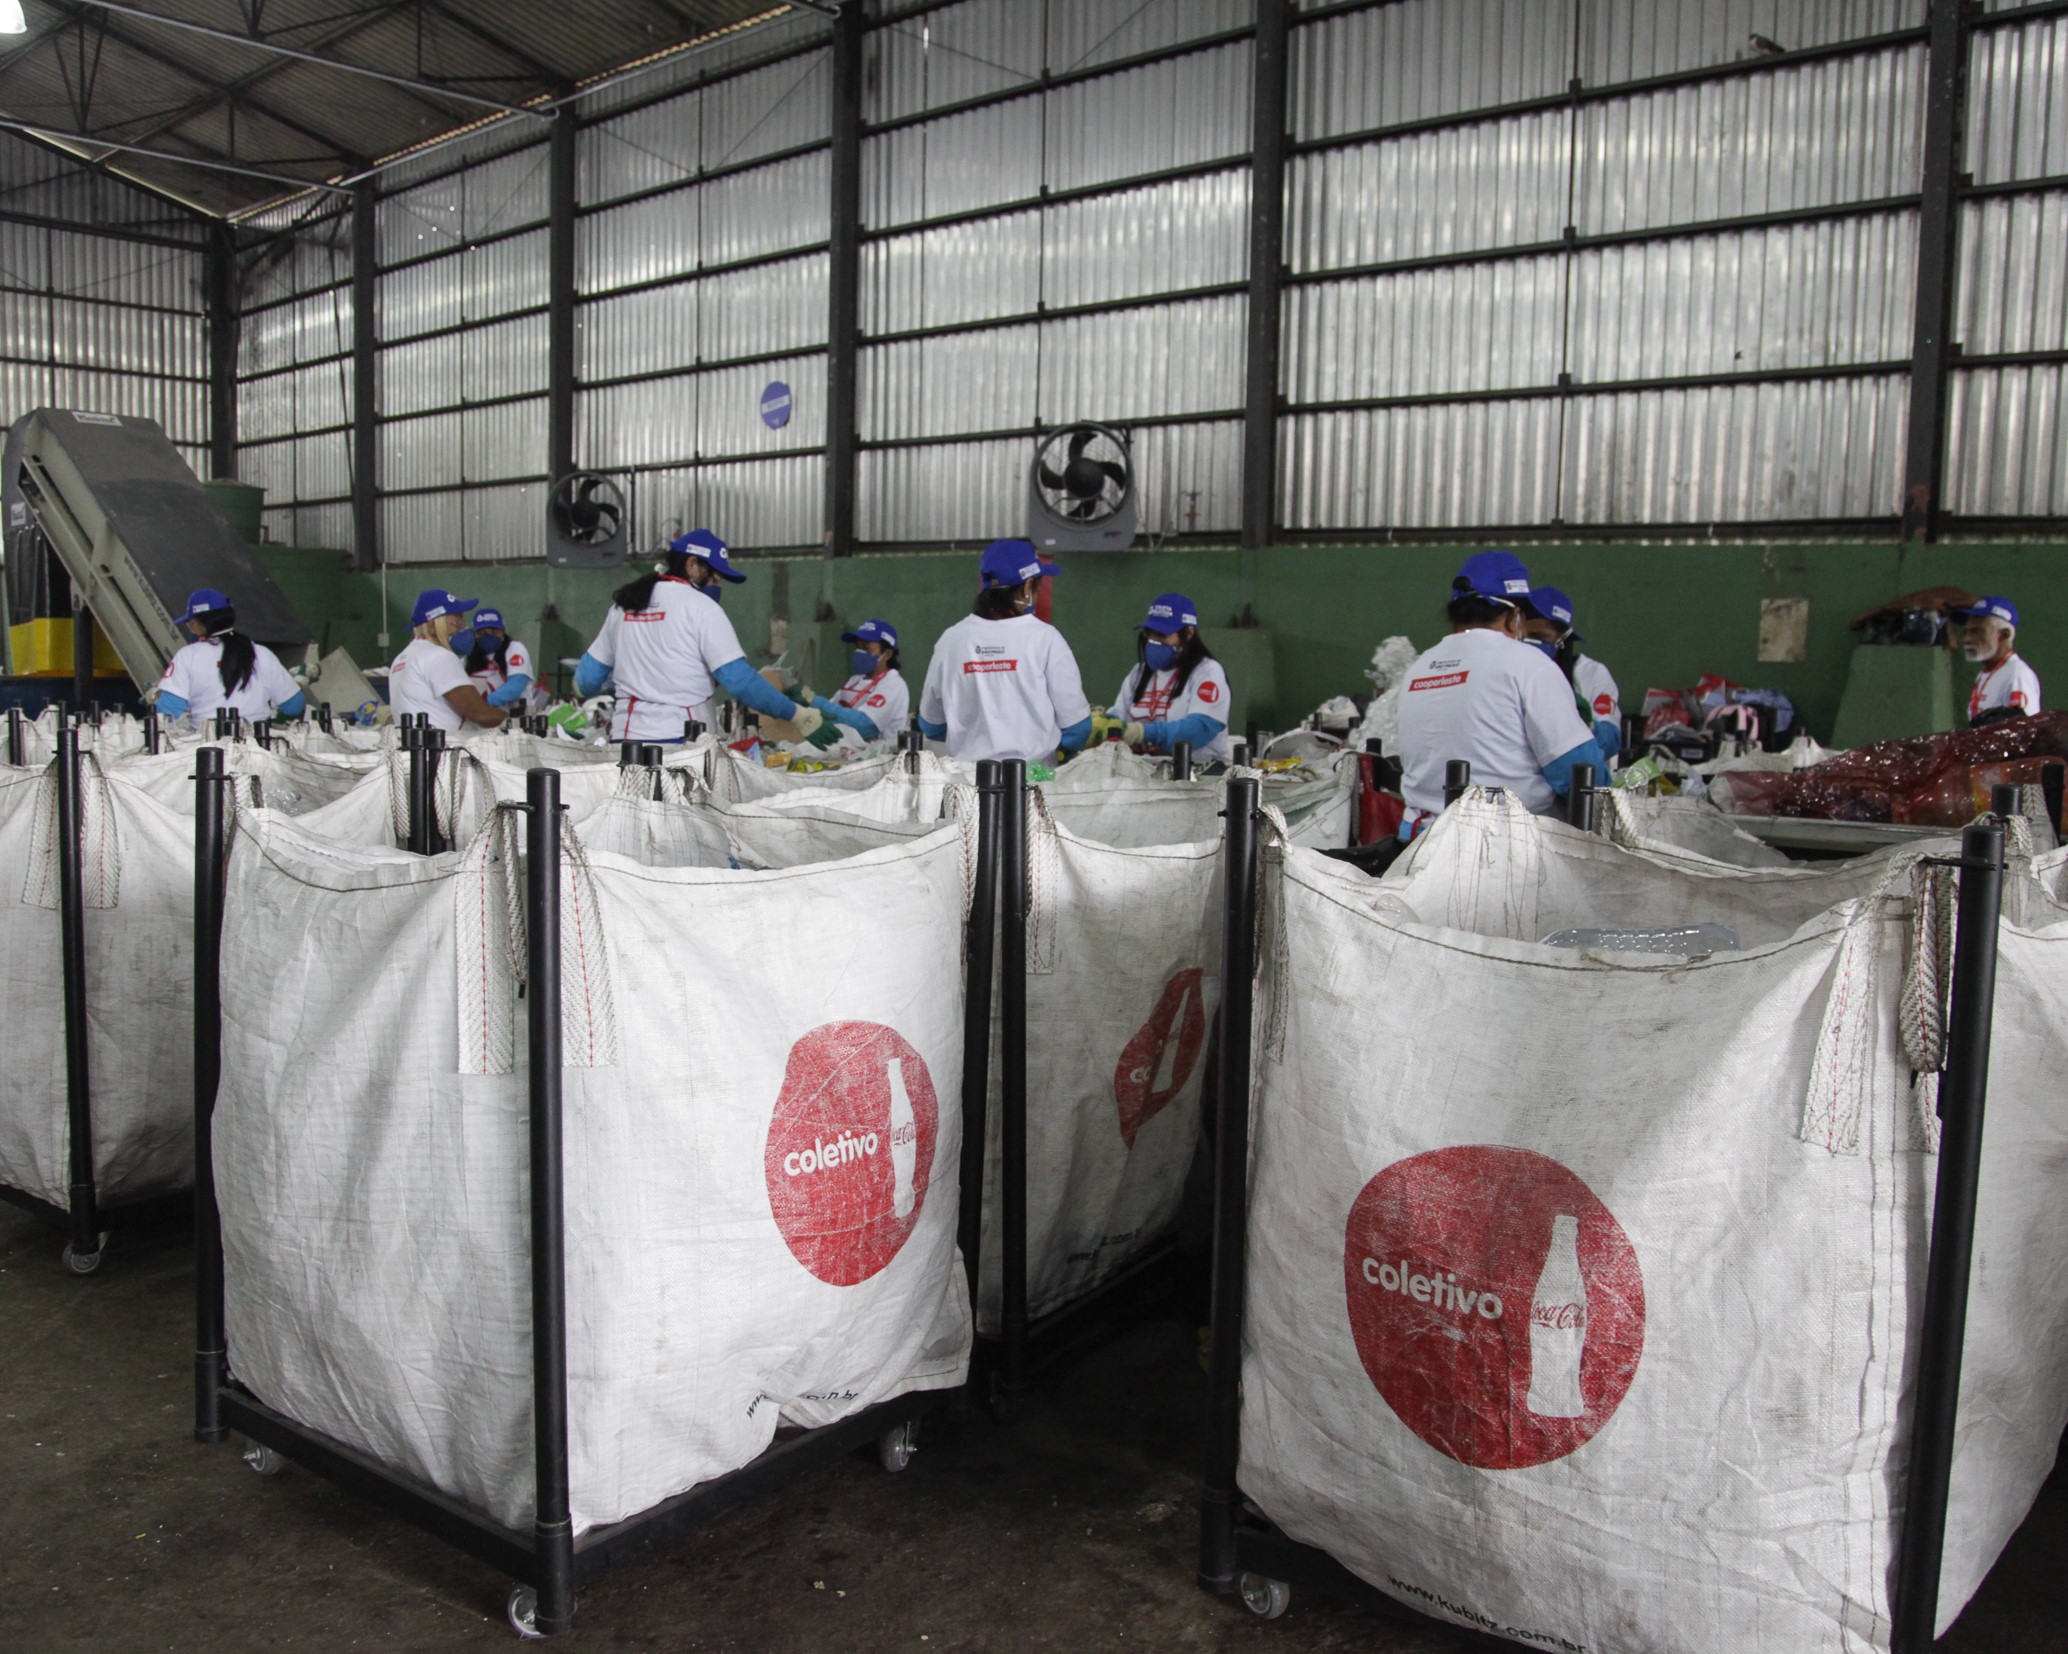 Recycling collectors in Brazil sort and bag materials